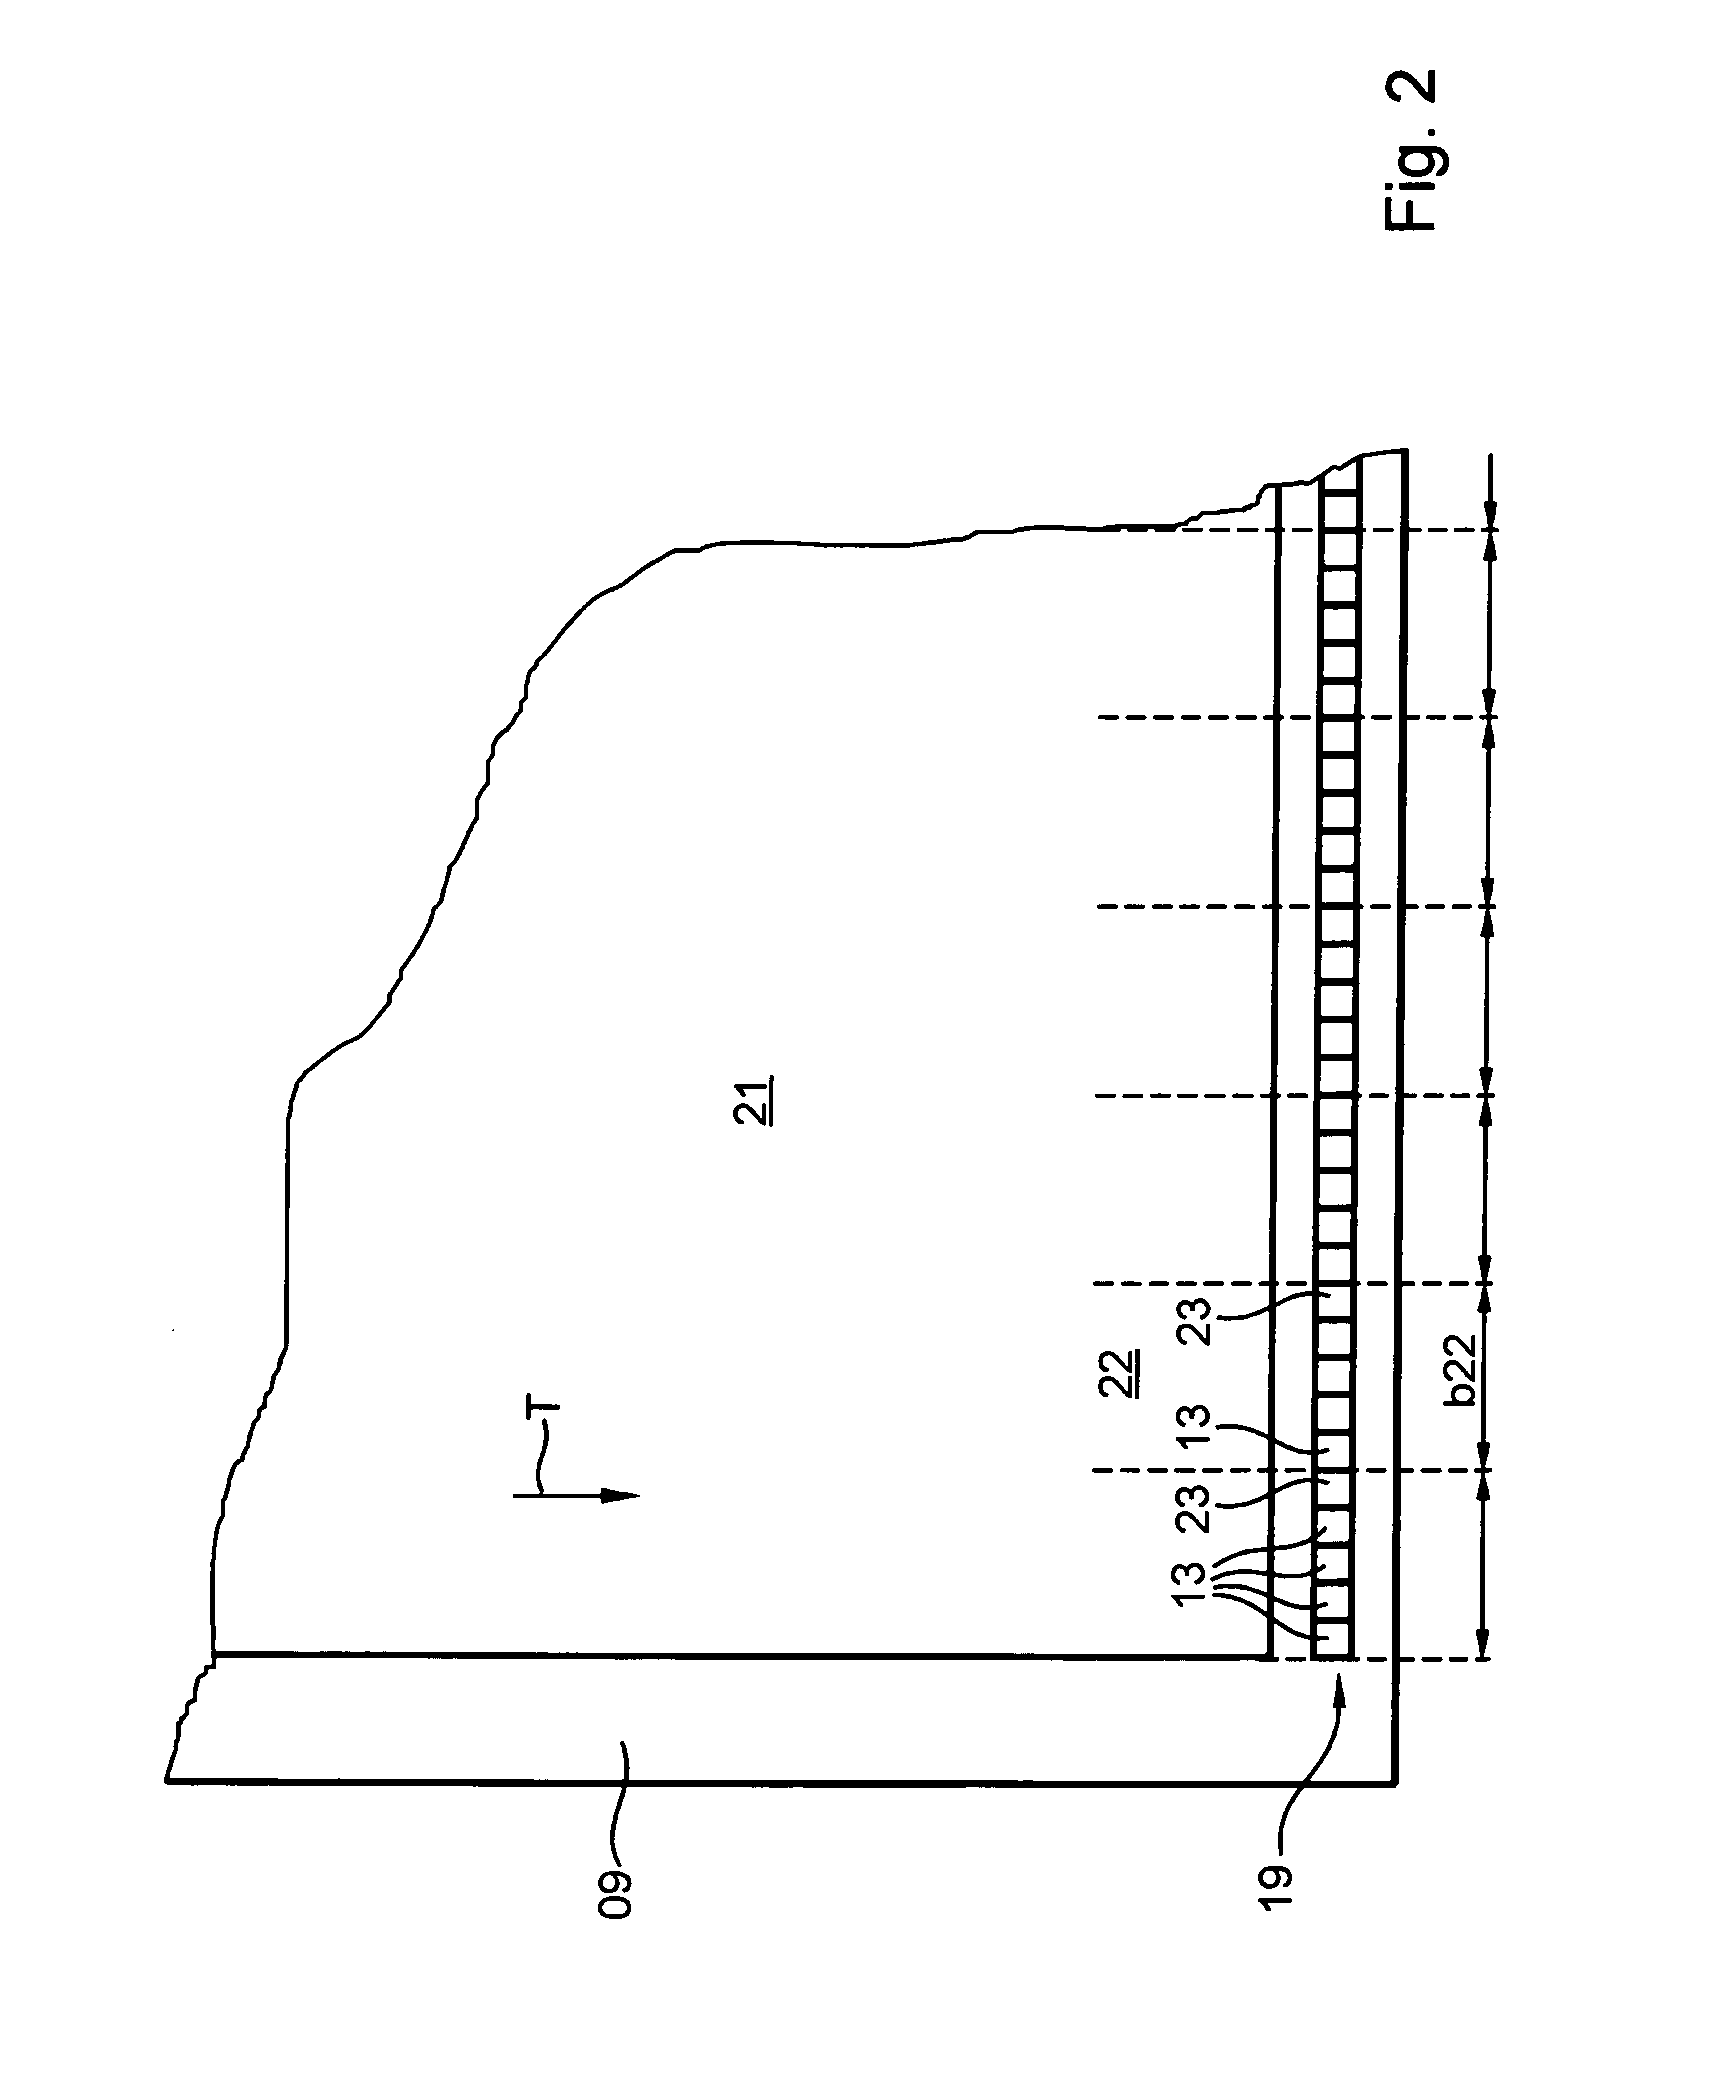 Method for regulating the ink in a printing press